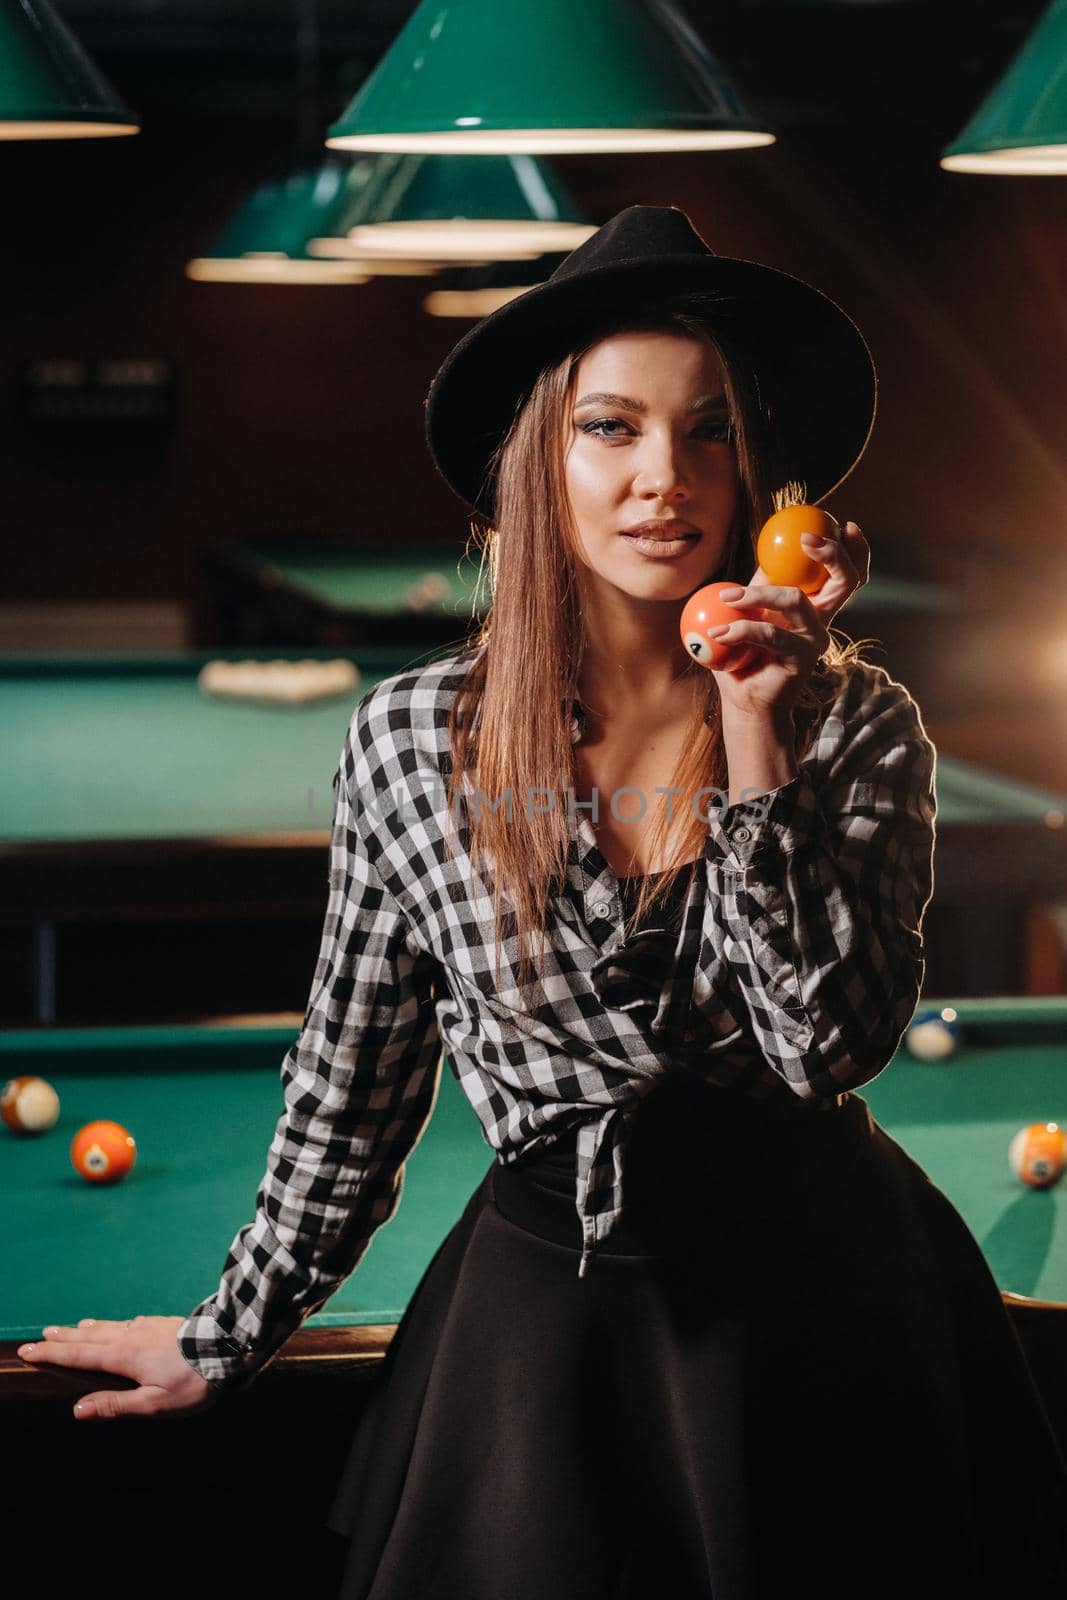 A girl in a hat in a billiard club with balls in her hands.Playing pool by Lobachad